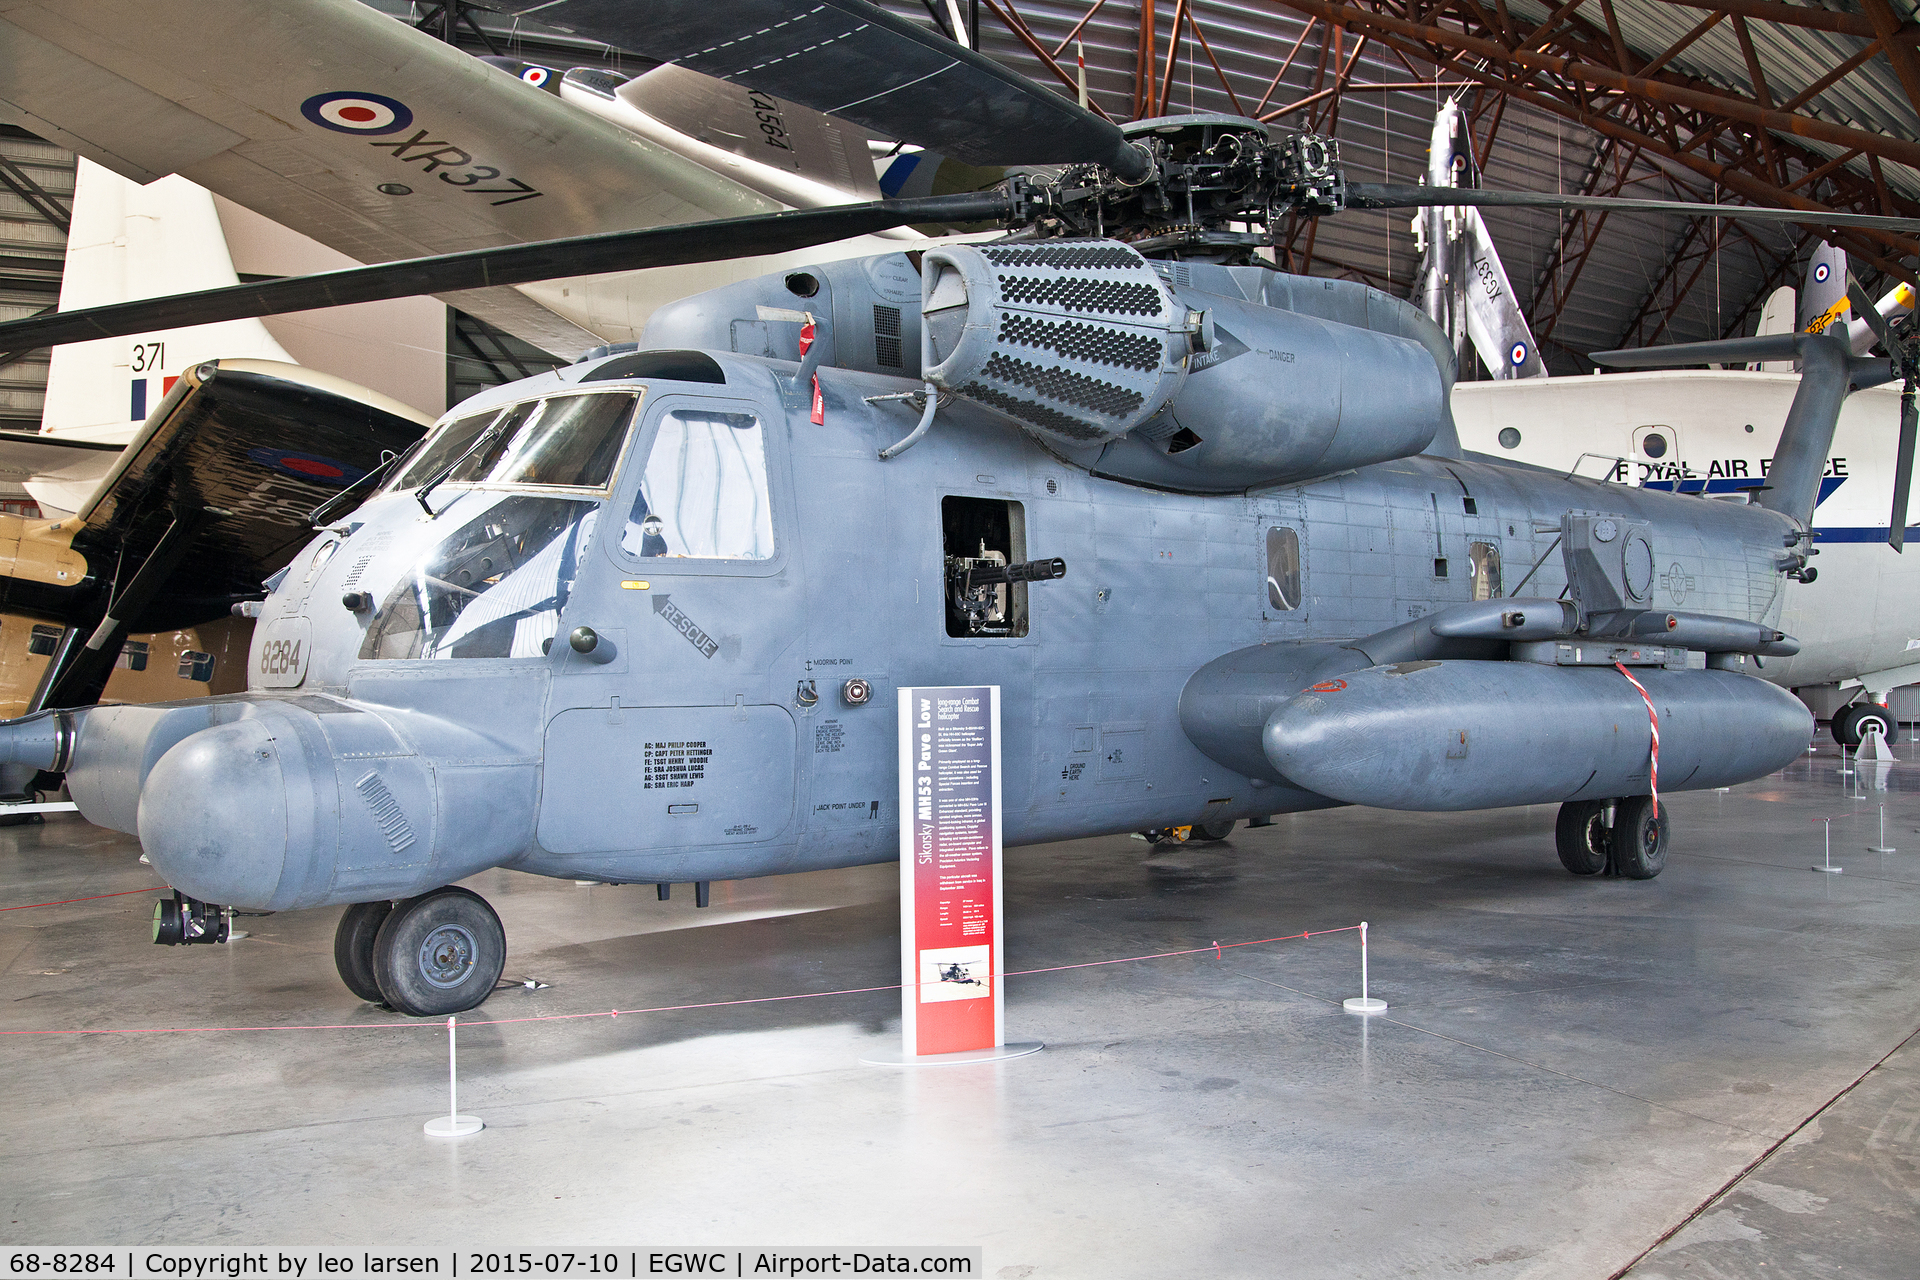 68-8284, 1968 Sikorsky MH-53M Pave Low IV C/N 65-131, Cosford Museum 10.7.2015